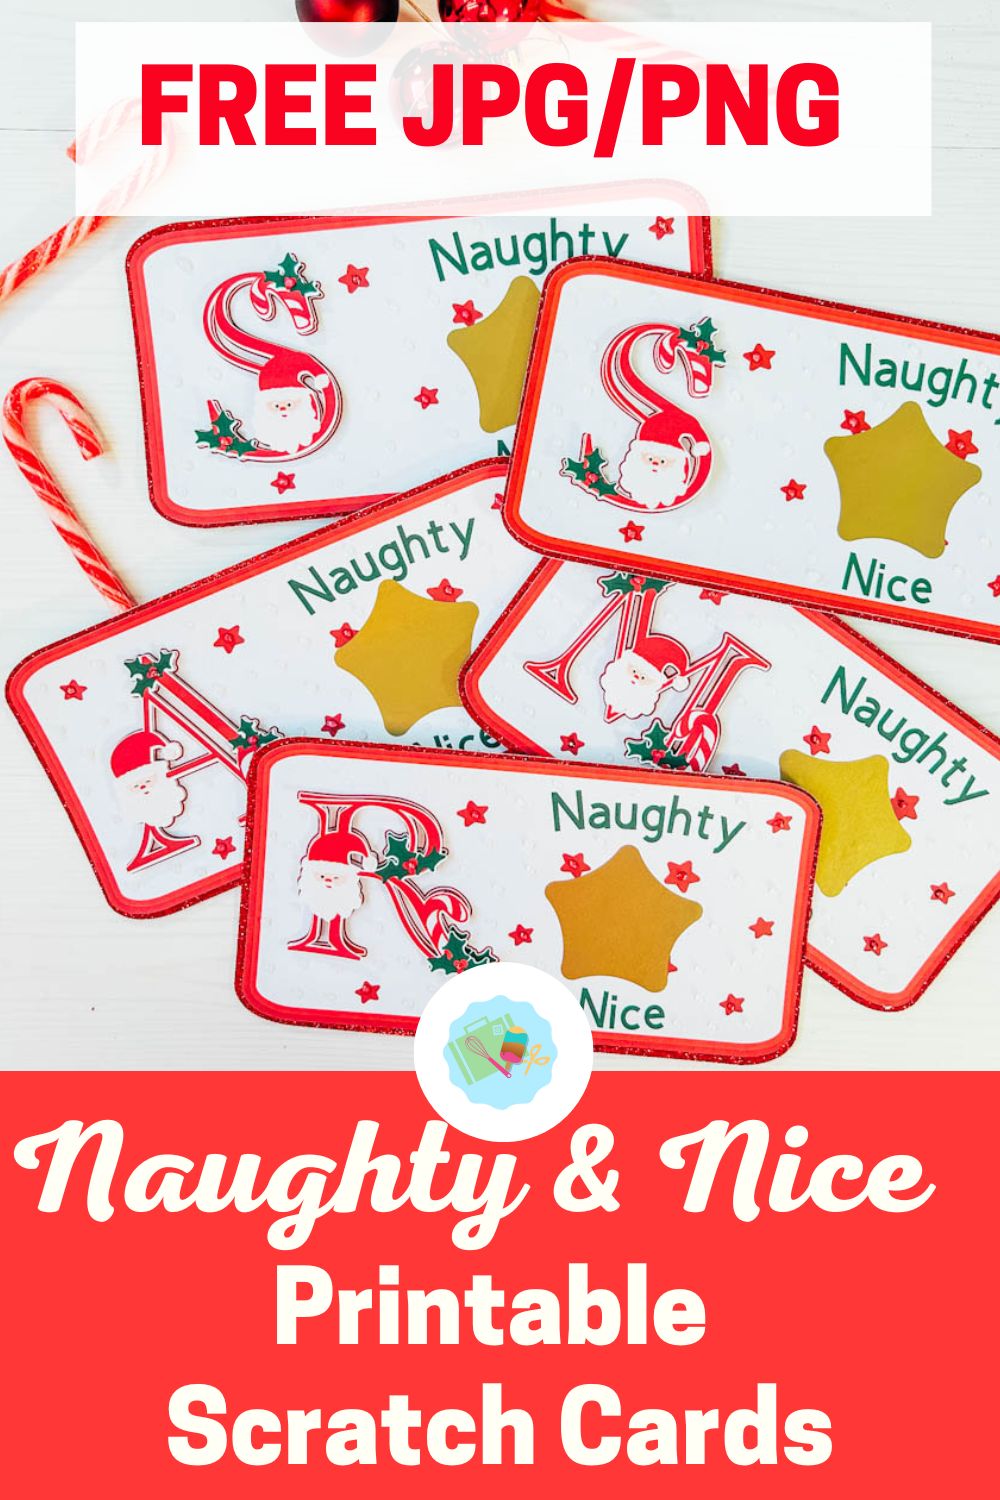 Free Naughty or Nice printable Scratch cards